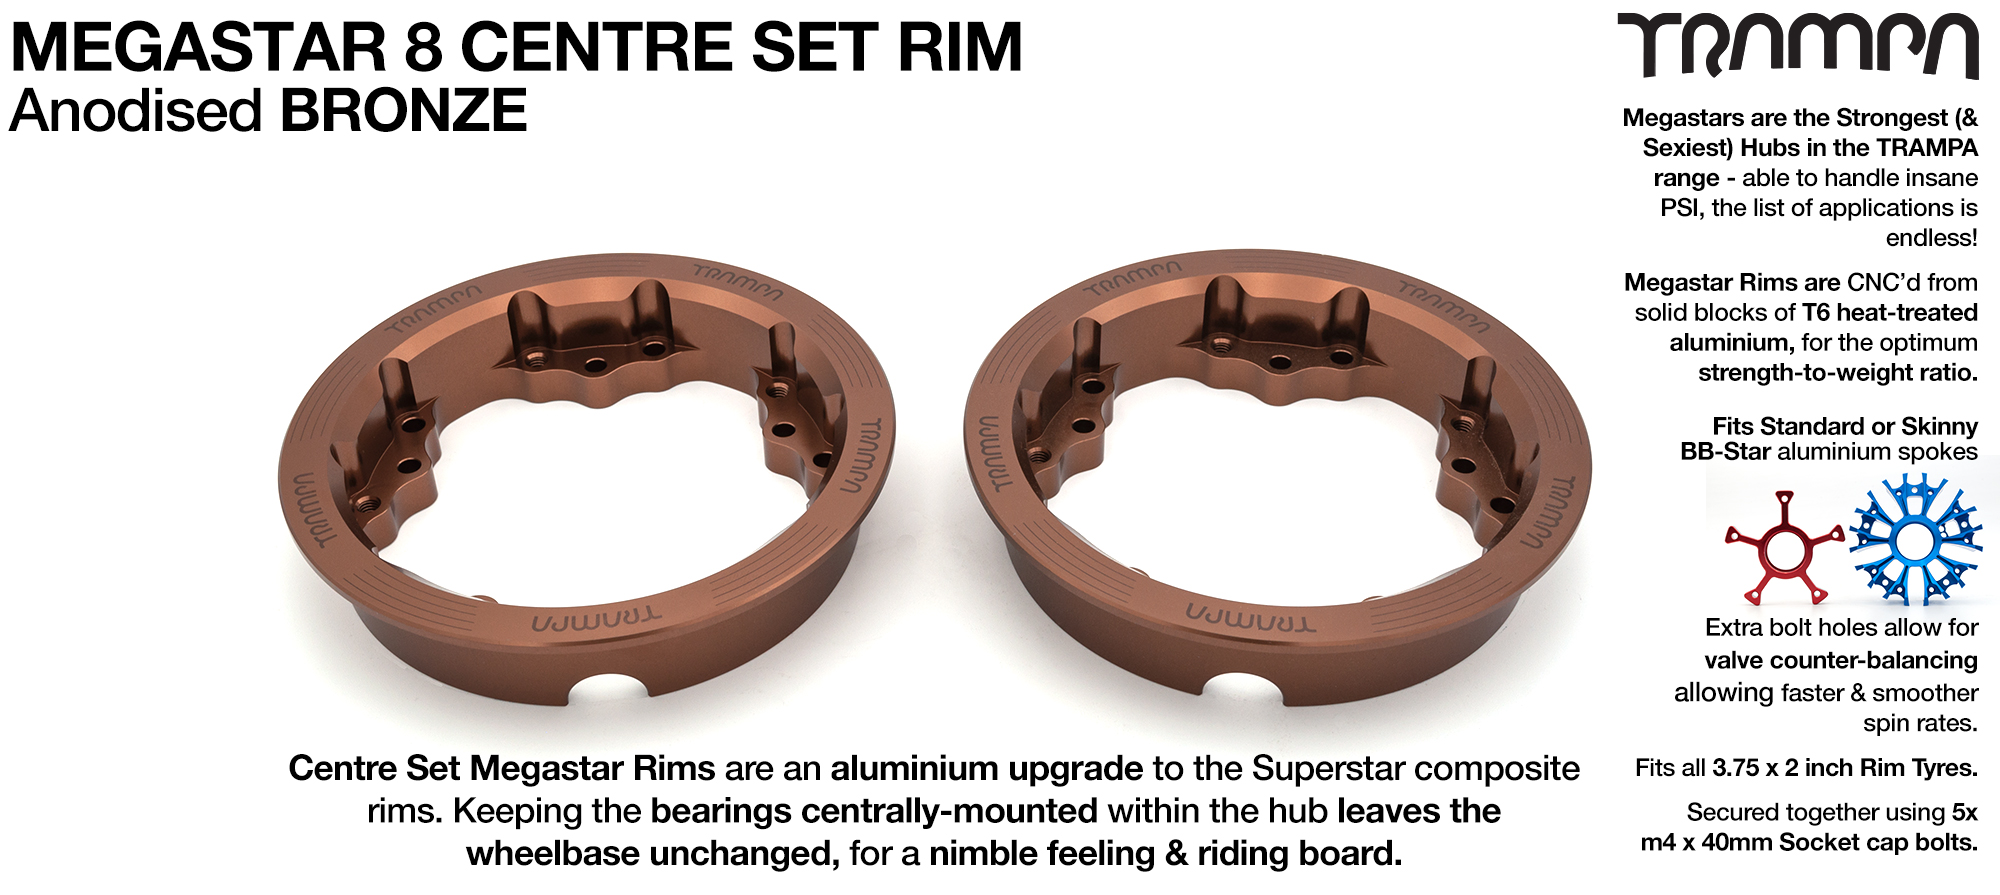 MEGASTAR 8 CS Rims Measure 3.75 x 2 Inch. The bearings are positioned CENTRE-SET & accept all 3.75 Rim Tyres - BRONZE